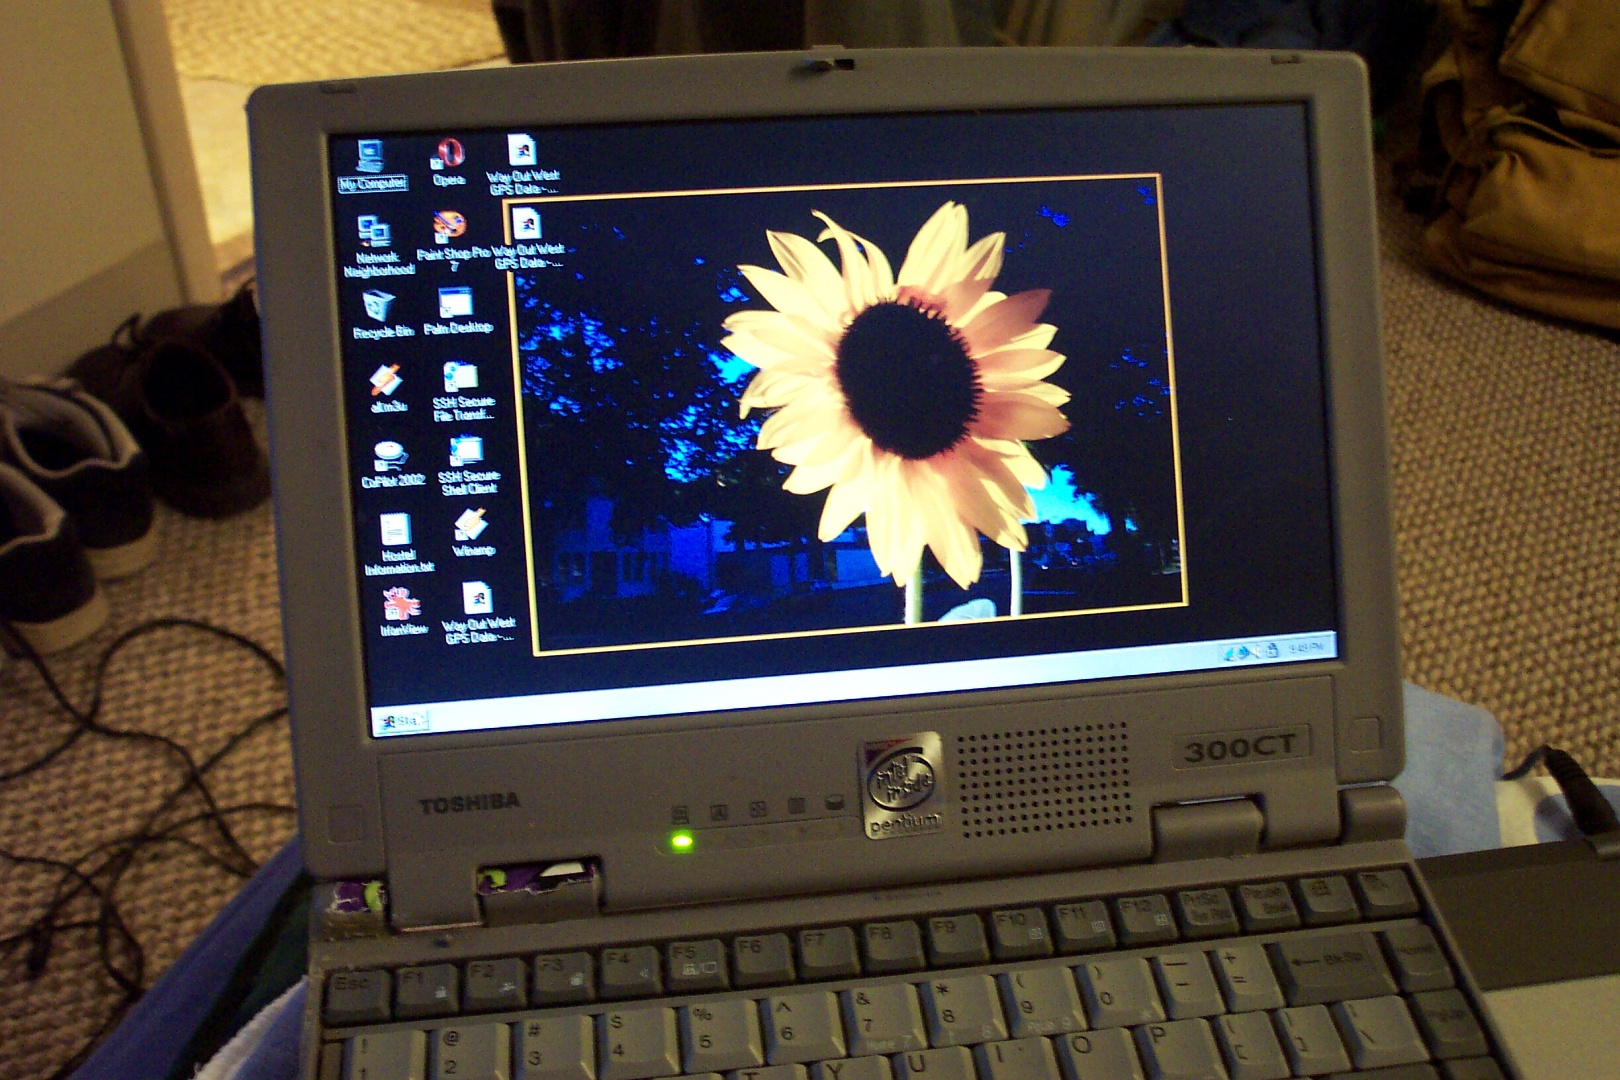 A picture of a Toshiba Portégé 300CT laptop running Windows 98, with a picture of a sunflower as the desktop background